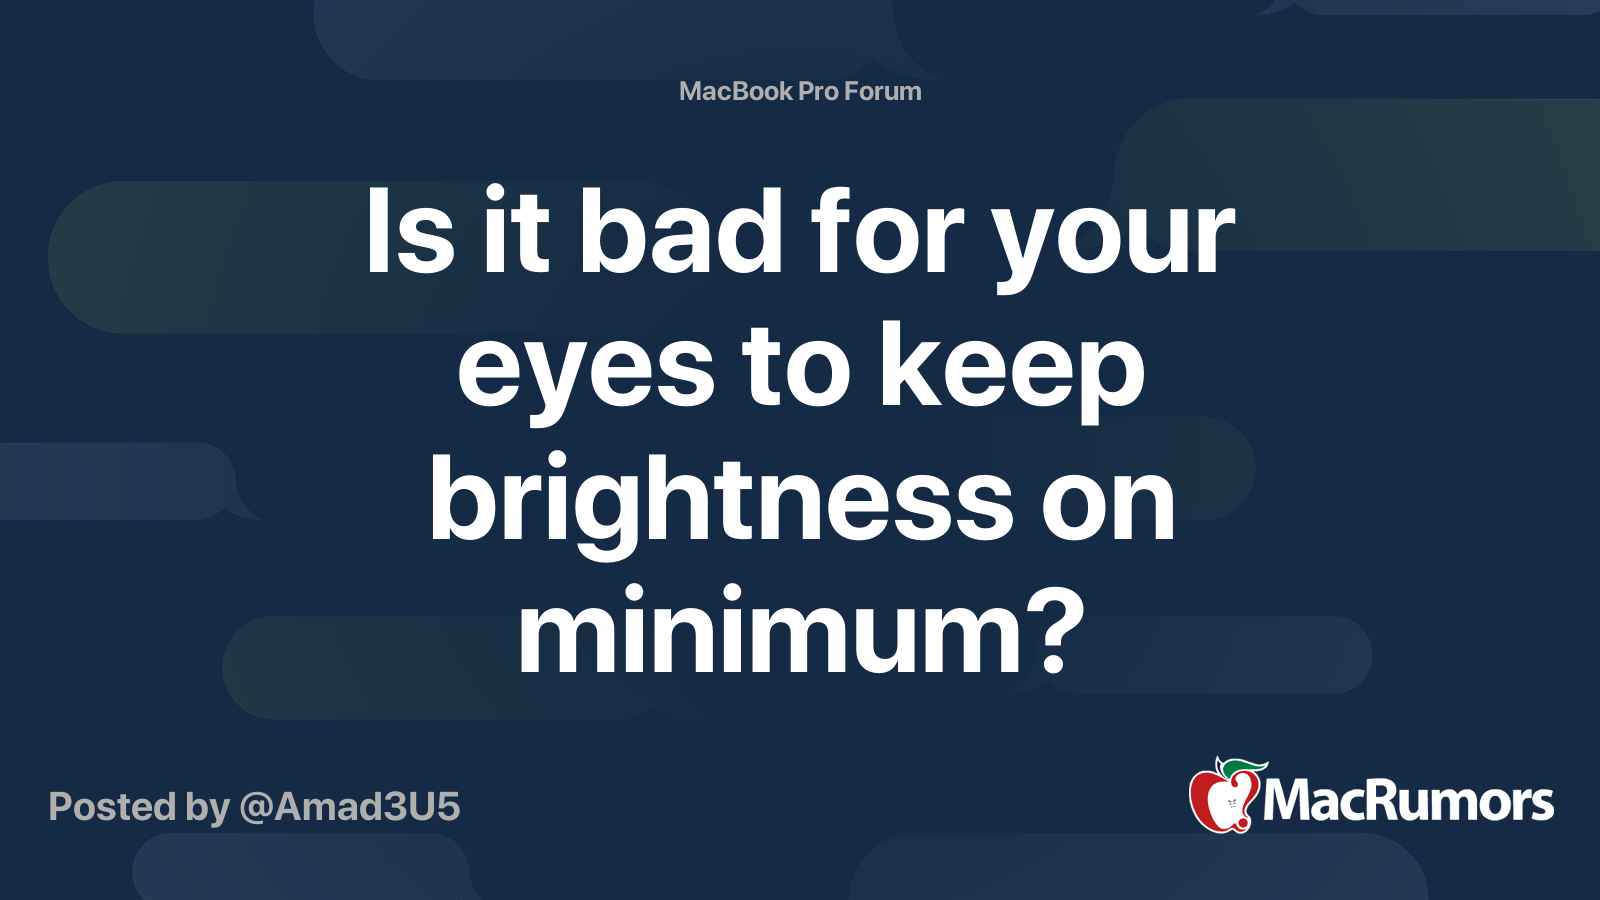 Is brightness bad for your eyes?